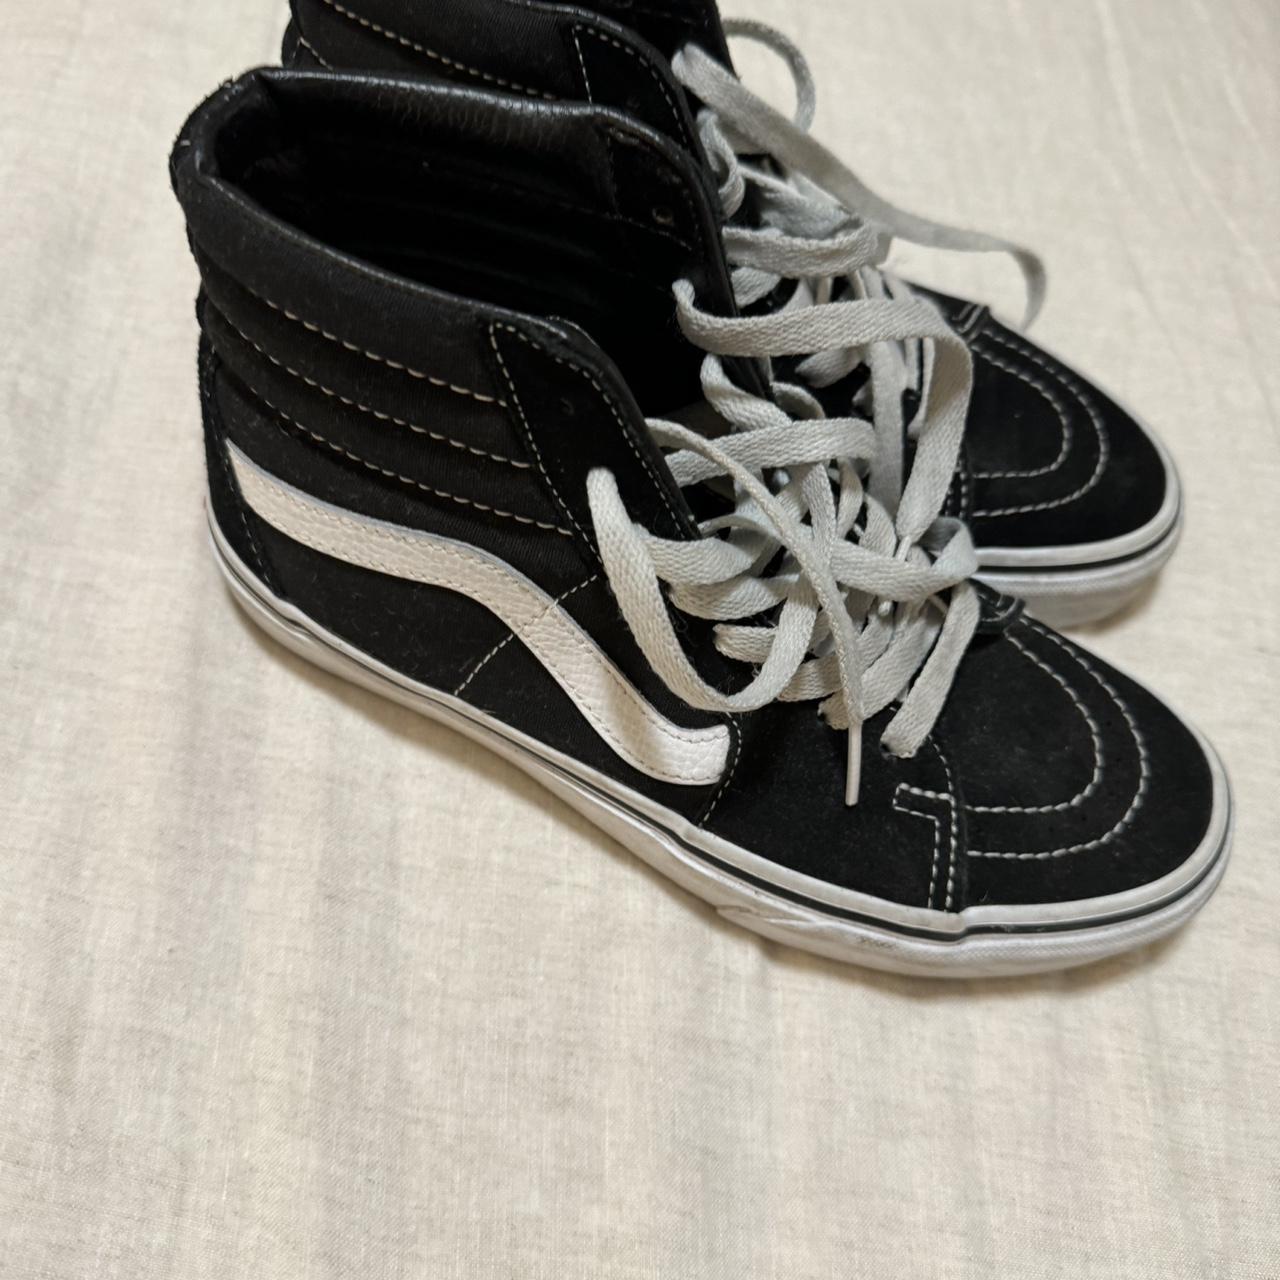 High top Vans | Size 6.5 US Good condition - Only... - Depop